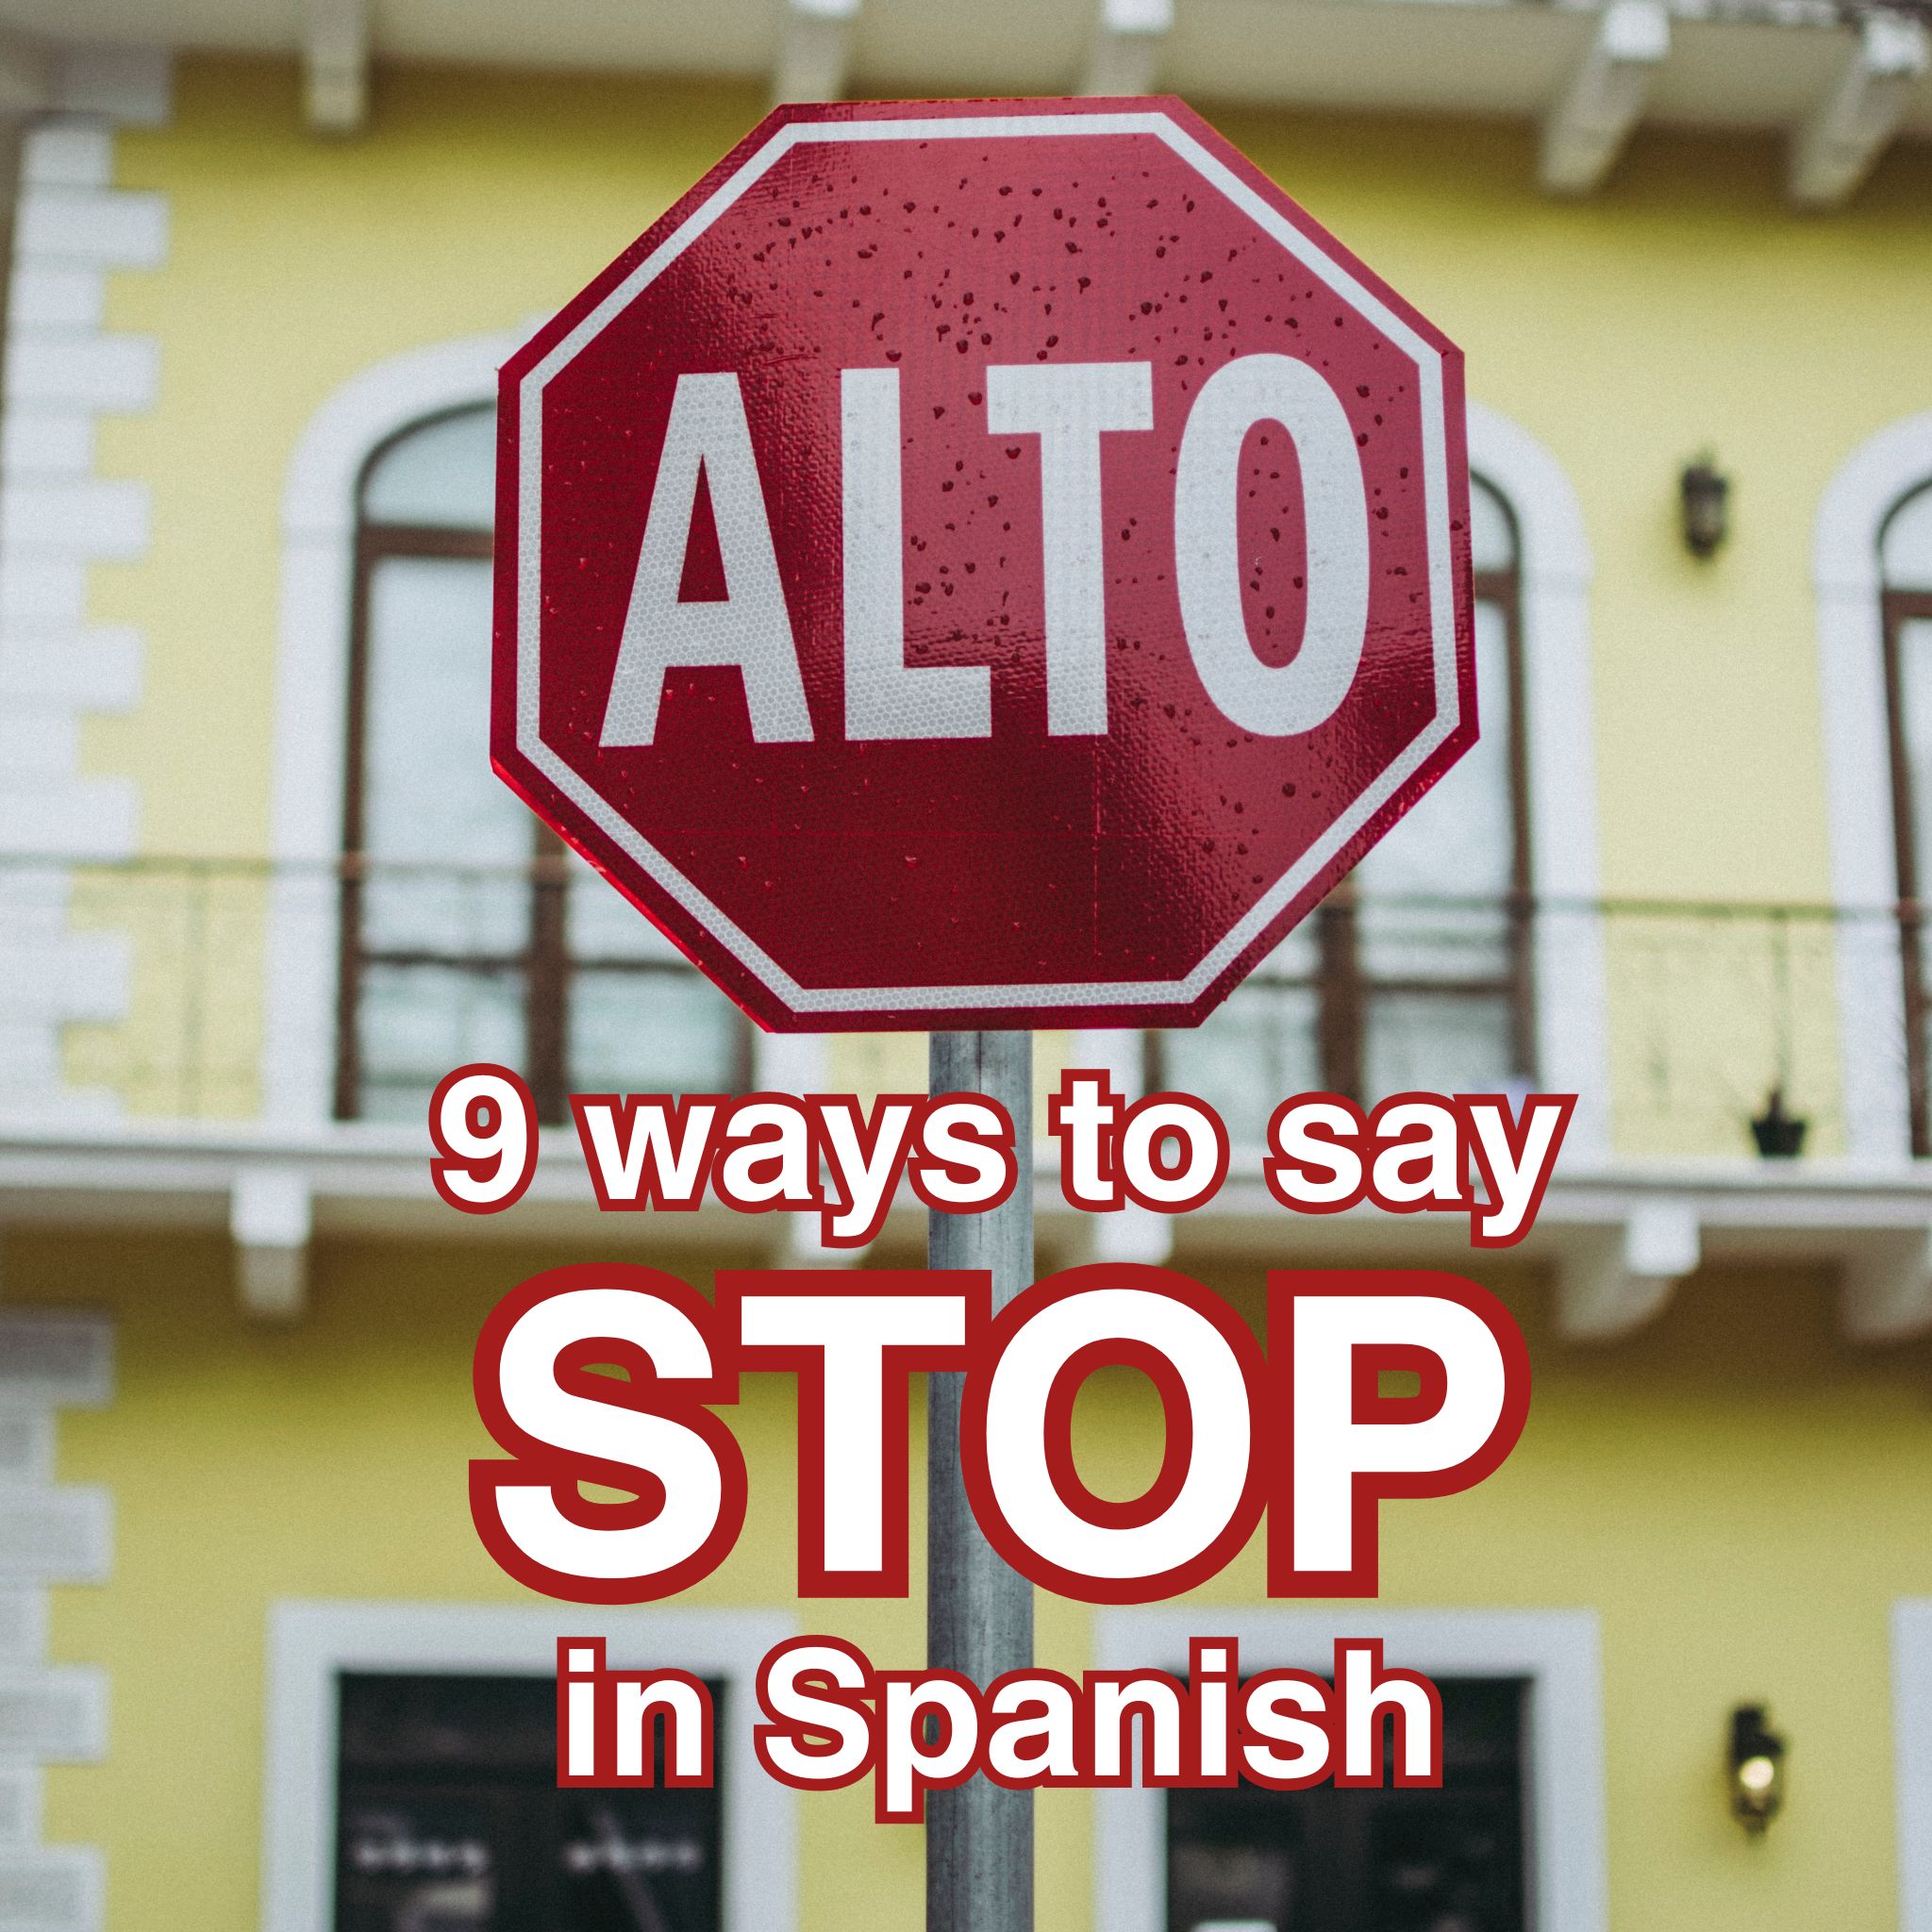 9 ways to say Stop in Spanish